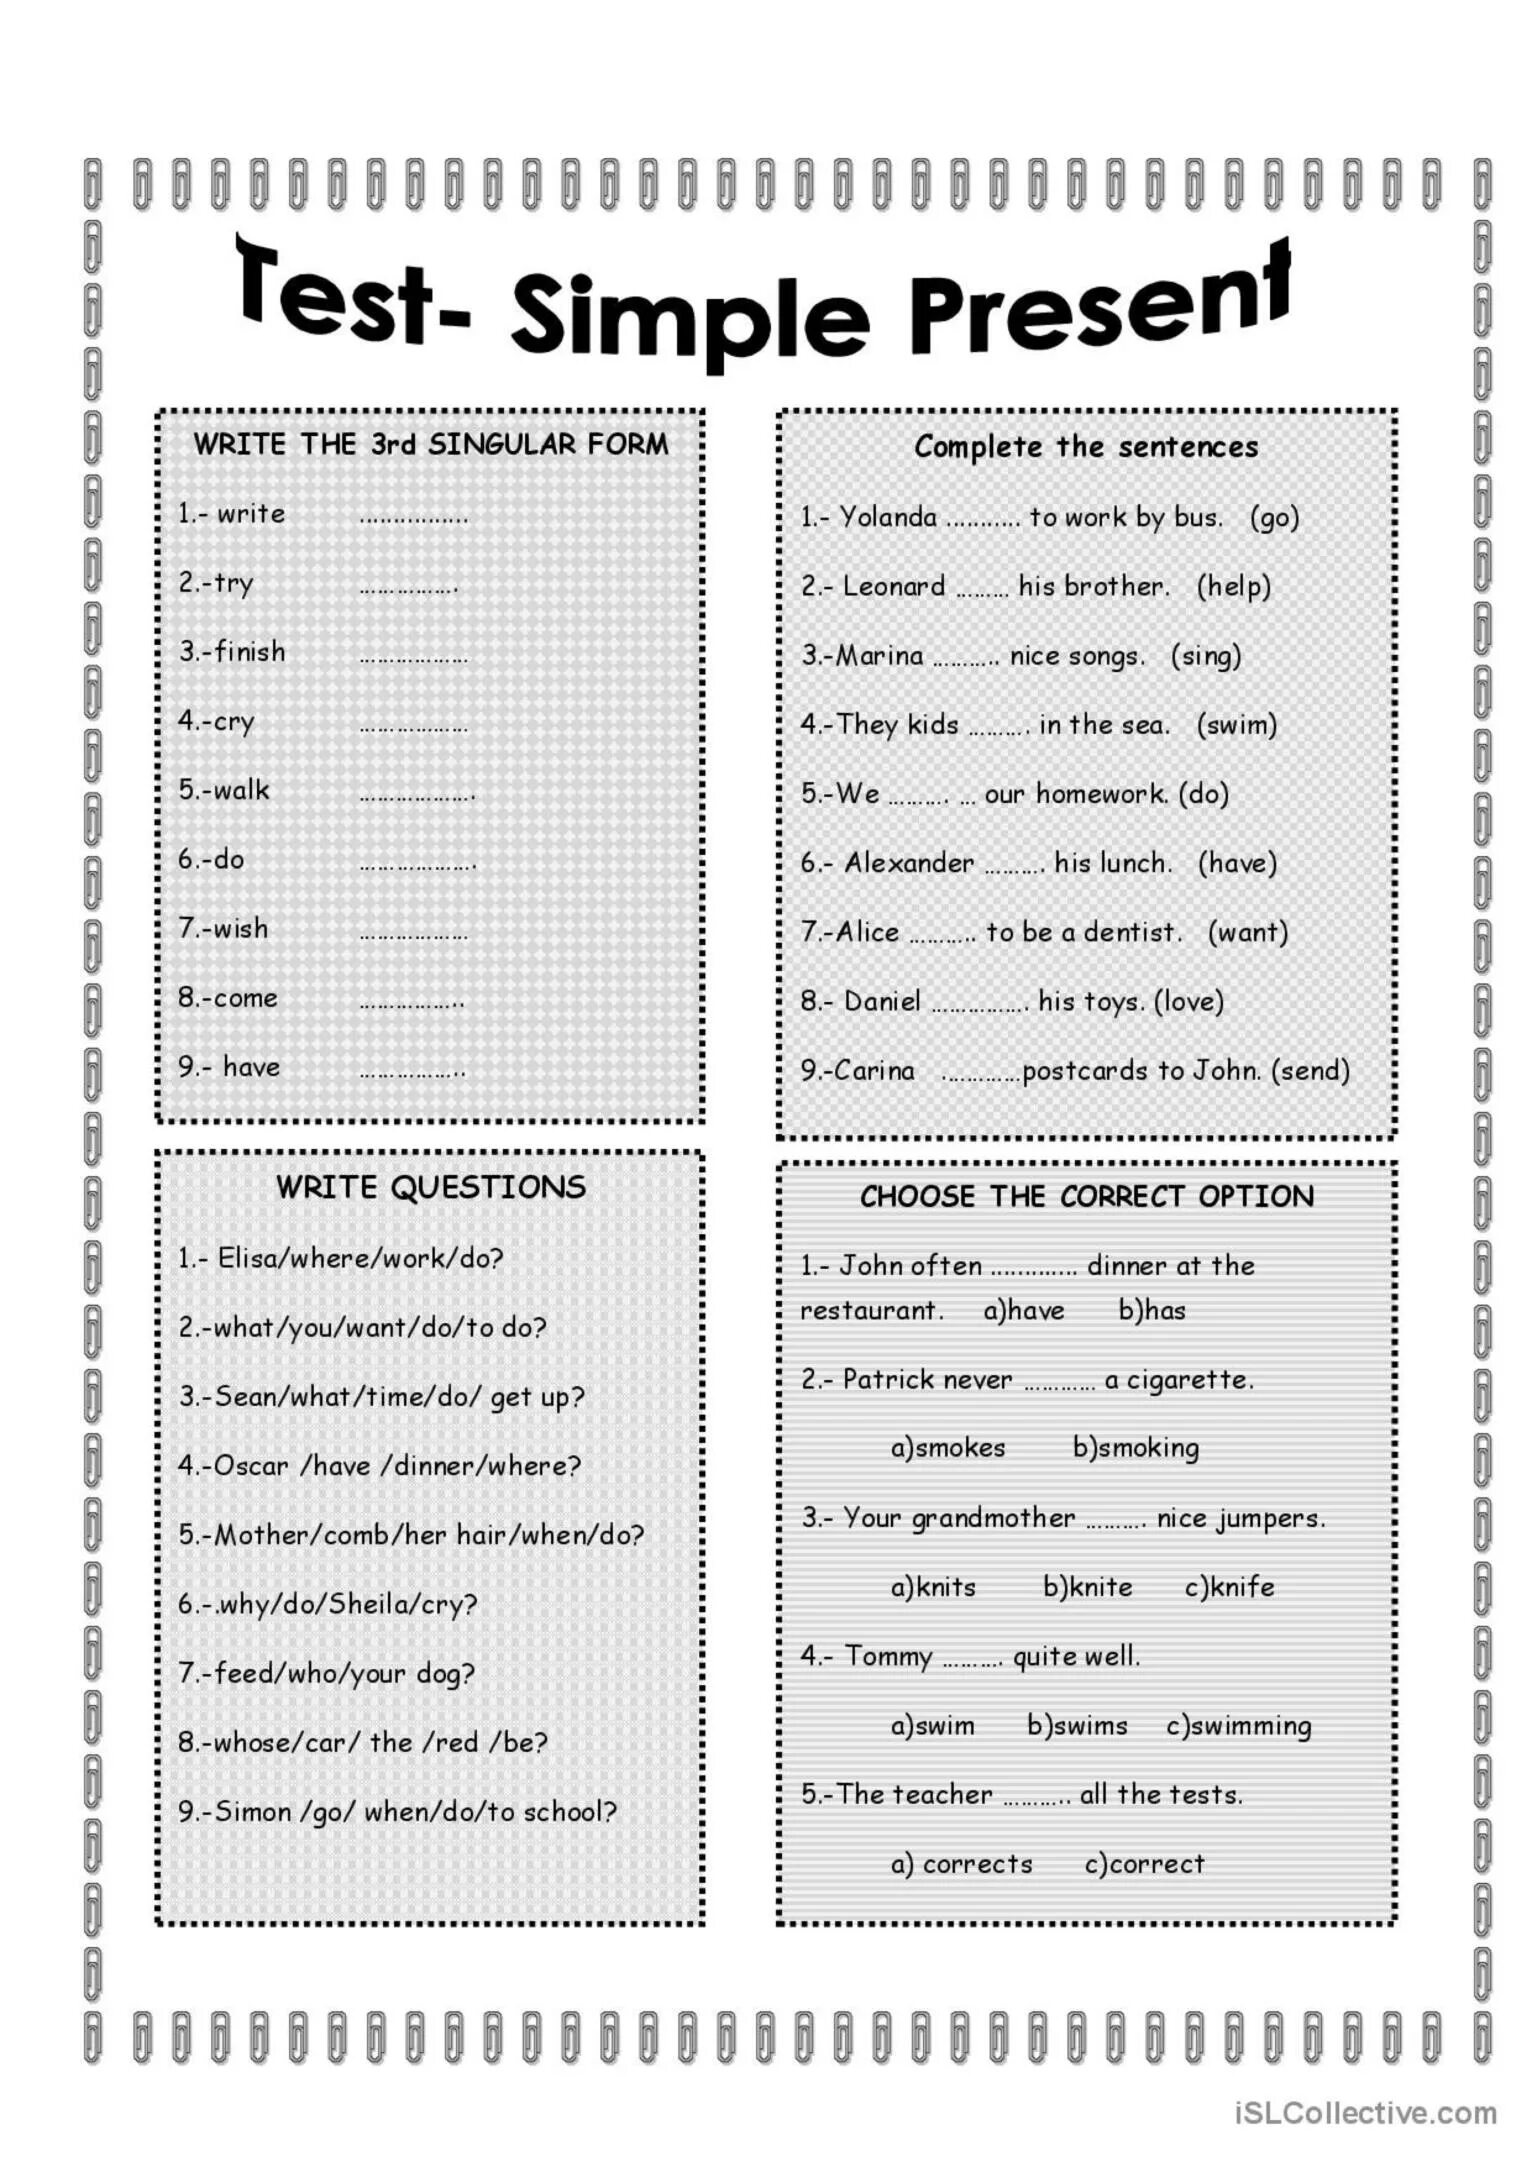 Present simple Worksheets тест. Present simple Test for Beginners. Test английский язык по present simple. Worksheets тесты 6 класс present simple. Тест английский язык pdf